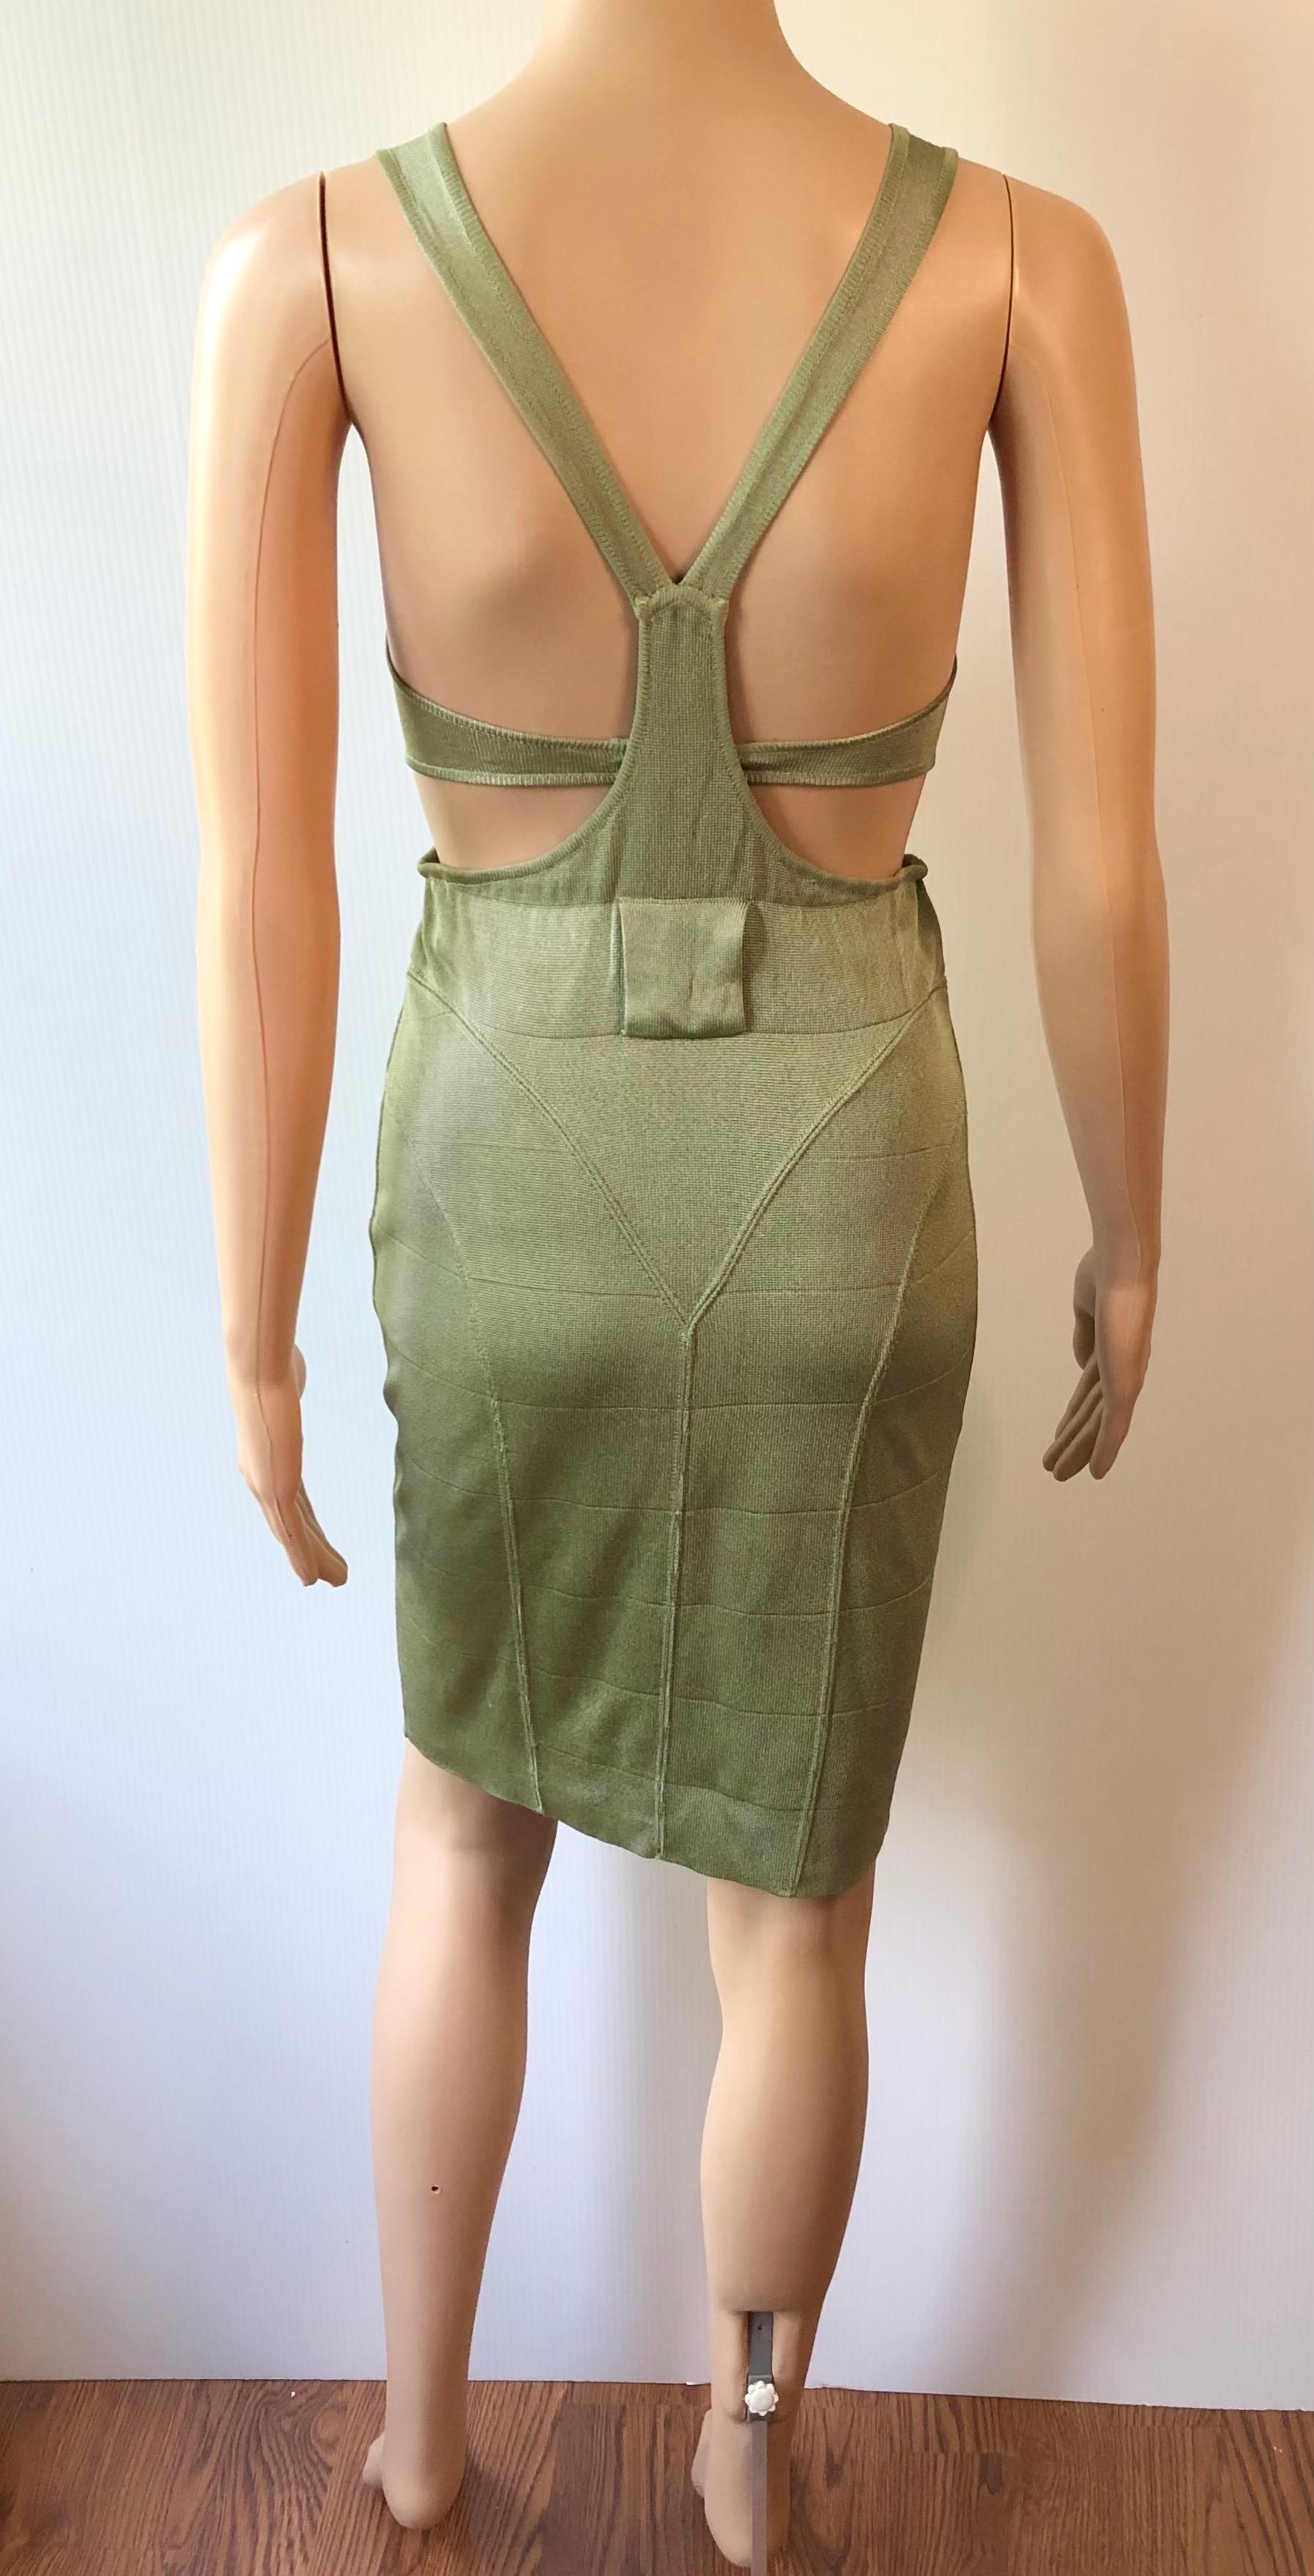 Azzedine Alaia S/S 1985 Vintage Plunged Cutout Bodycon Green Dress In Good Condition For Sale In Naples, FL